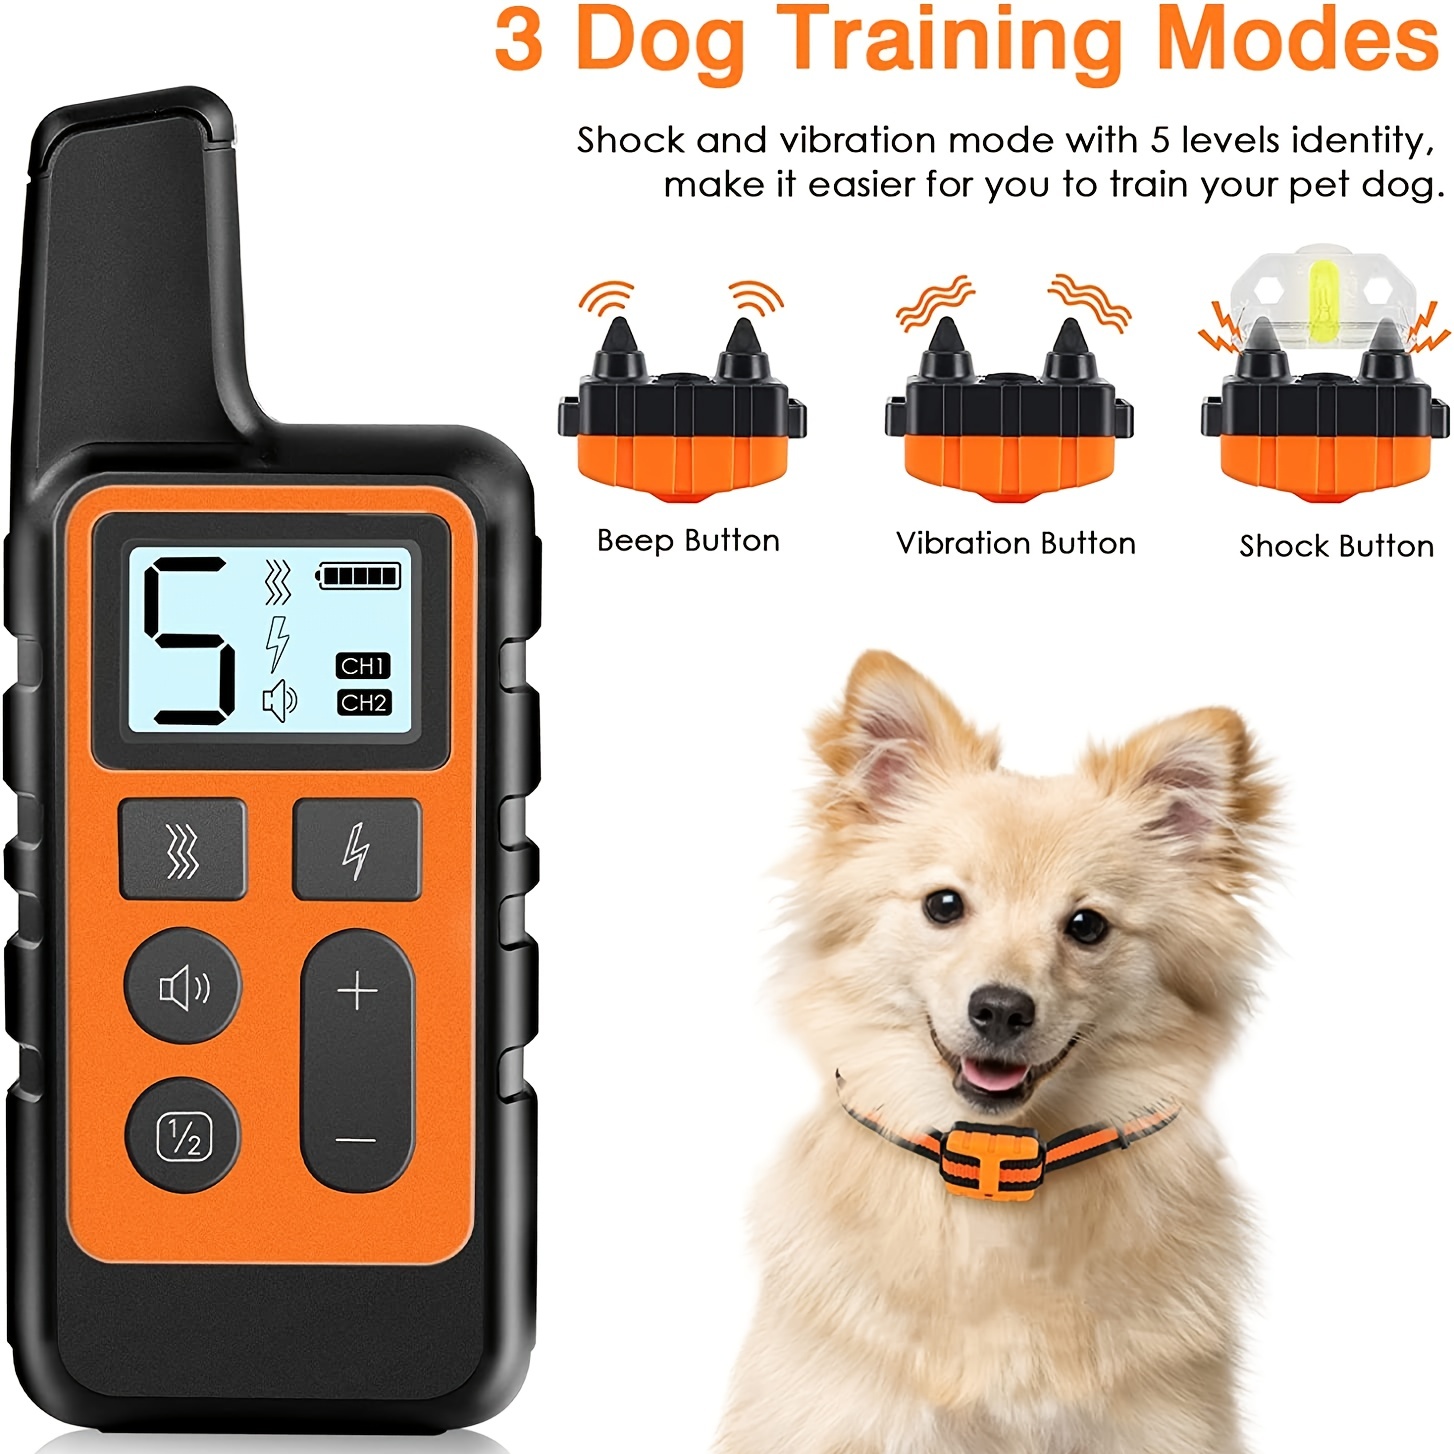 Buy Dog Training Collar with 3 Training Modes, Waterproof & Shock Absorption